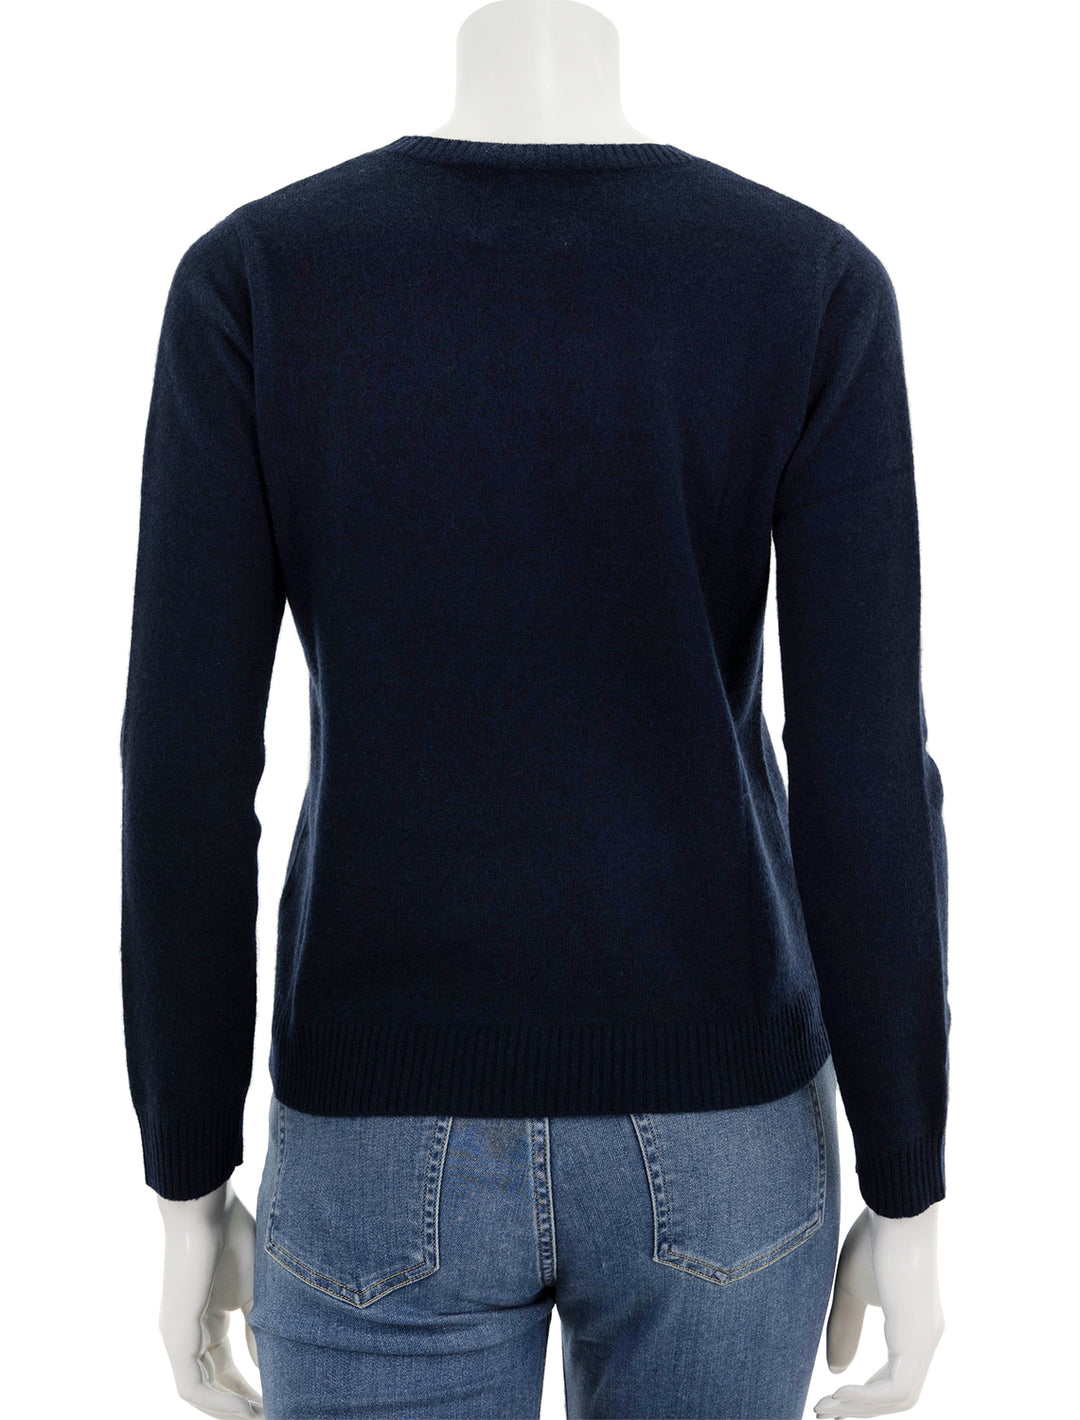 Back view of Jumper 1234's merde sweater in navy and red.